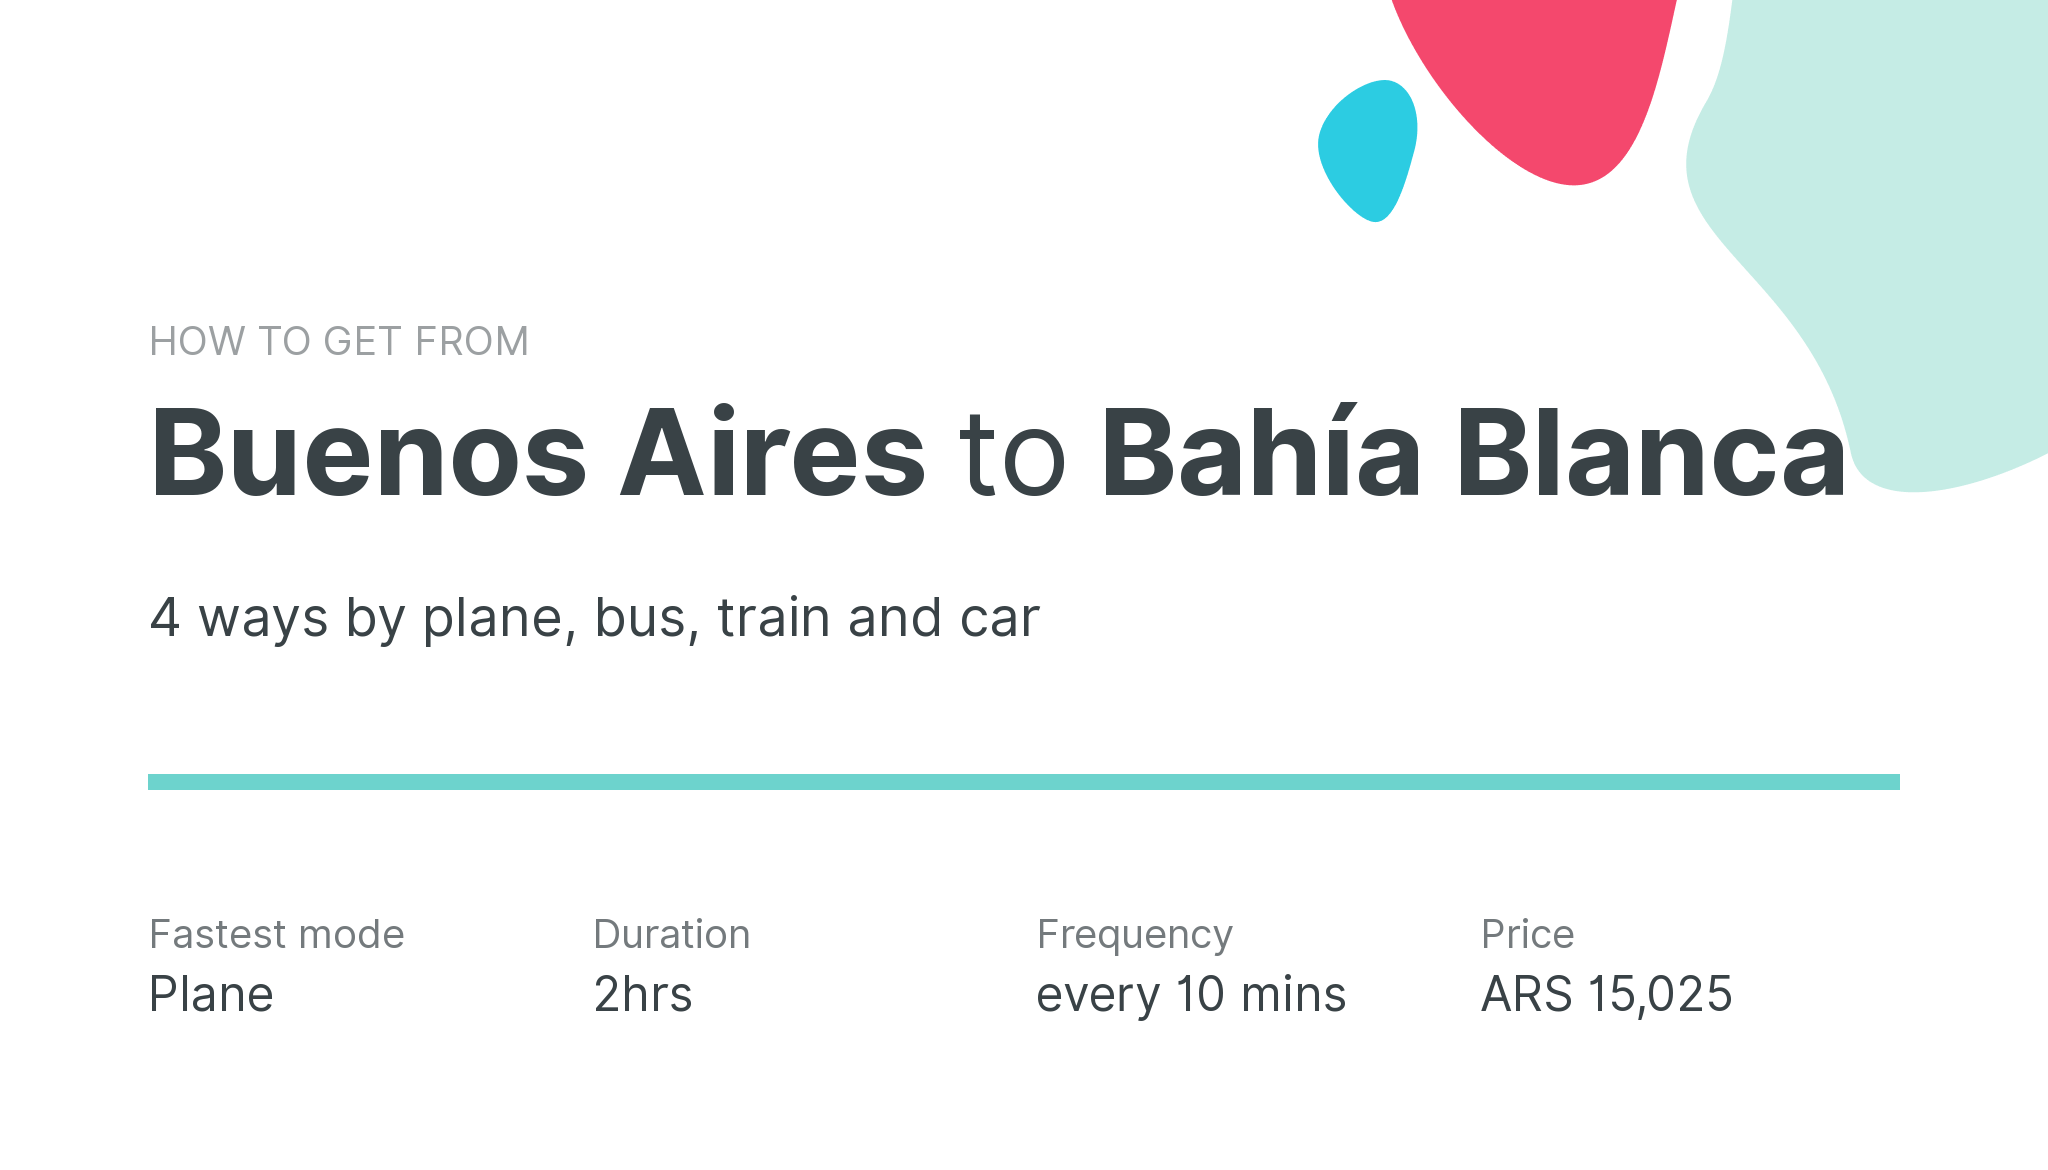 How do I get from Buenos Aires to Bahía Blanca